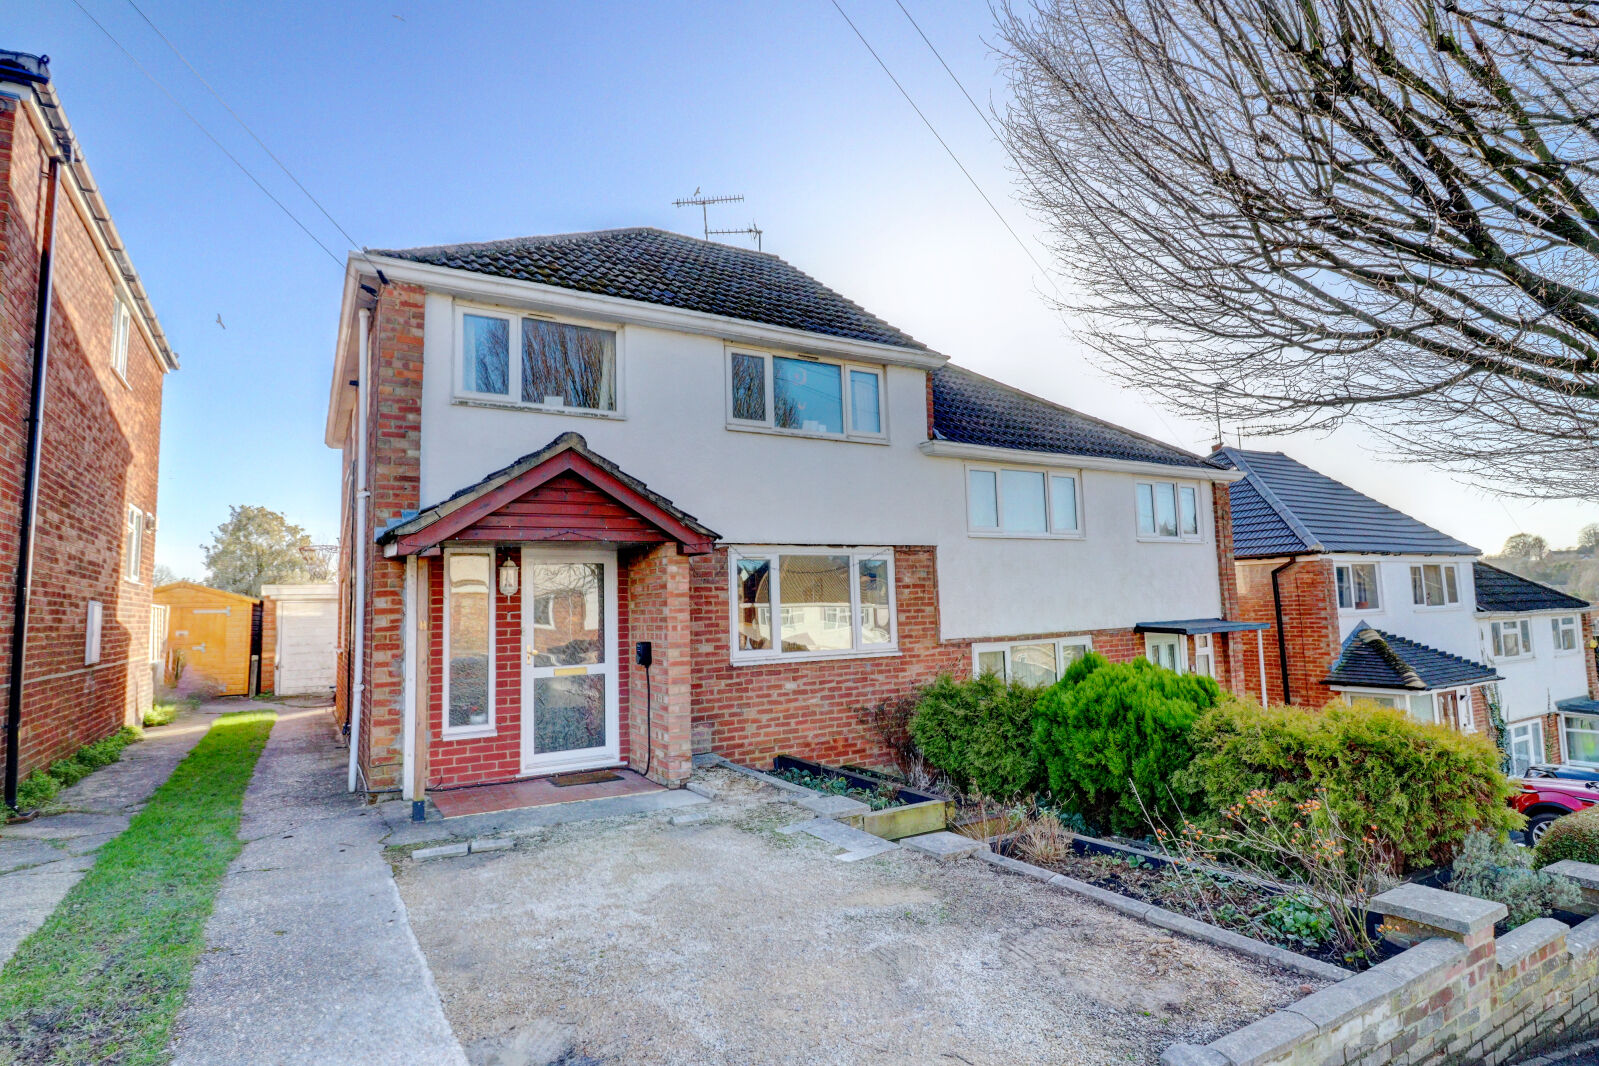 3 bedroom semi detached house for sale Kingston Road, High Wycombe, HP13, main image